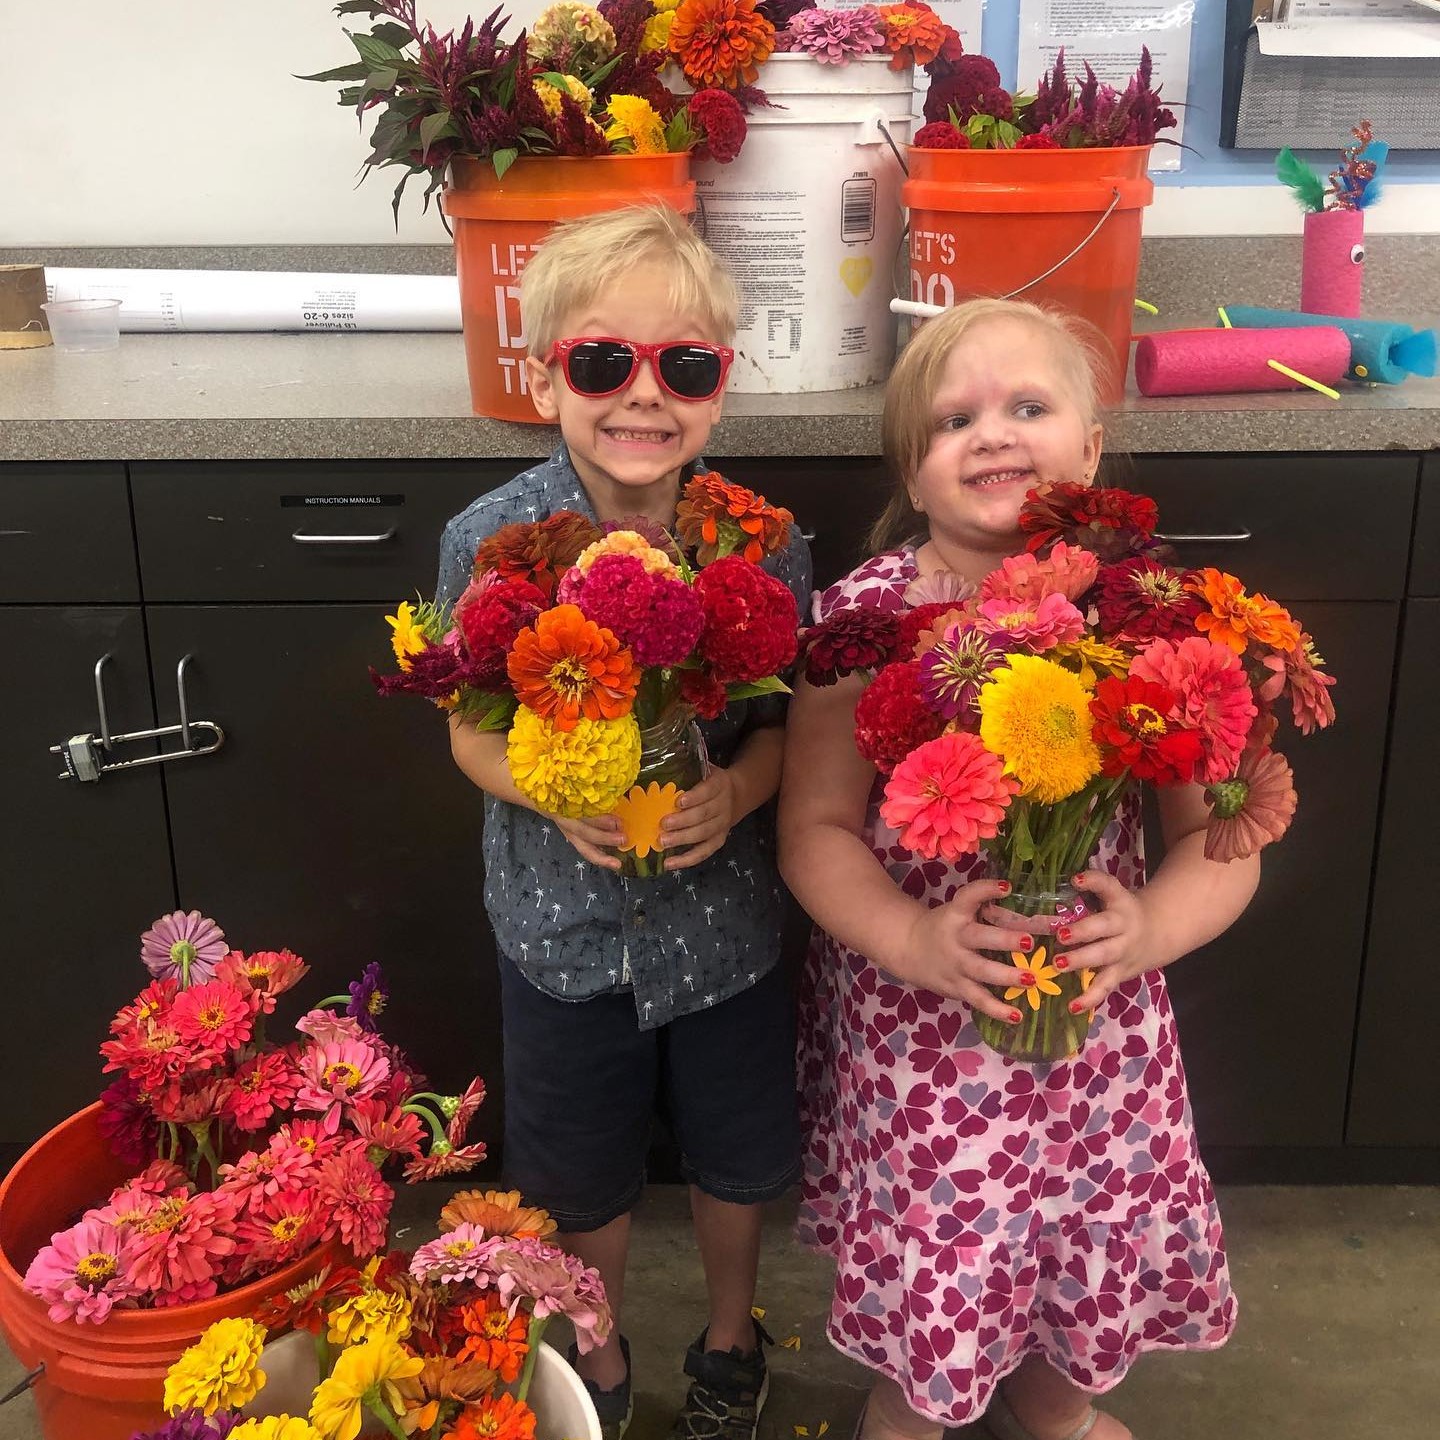 A boy wearing sunglasses and a girl who are both holding flowers